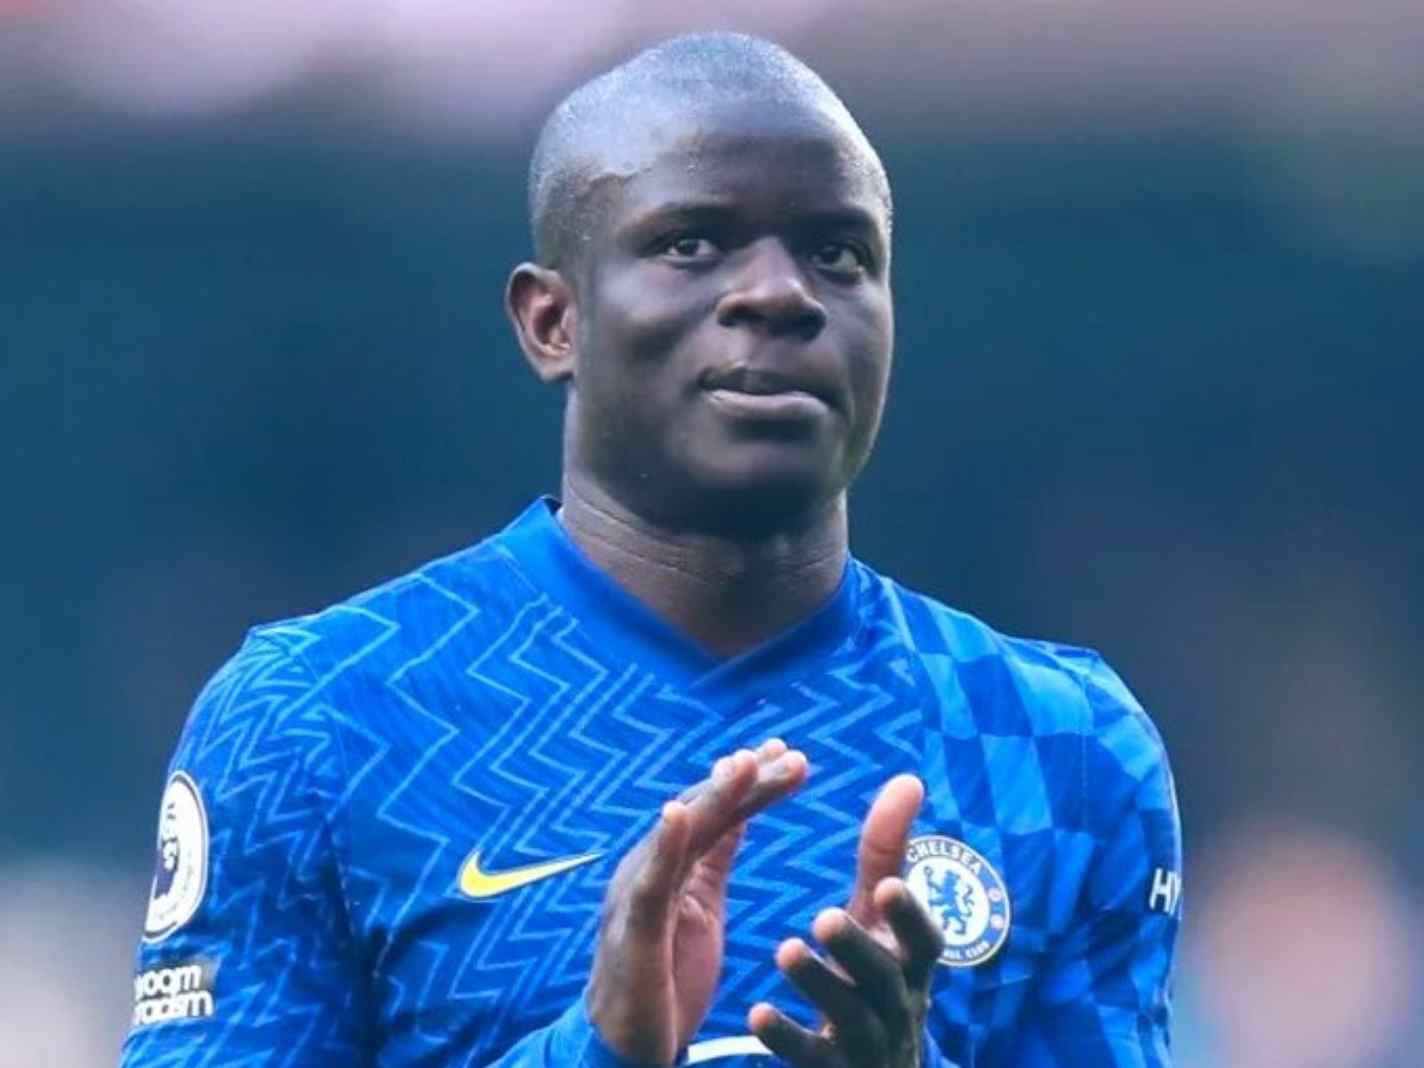 In this image - N'Golo Kante clapping during a Chelsea game